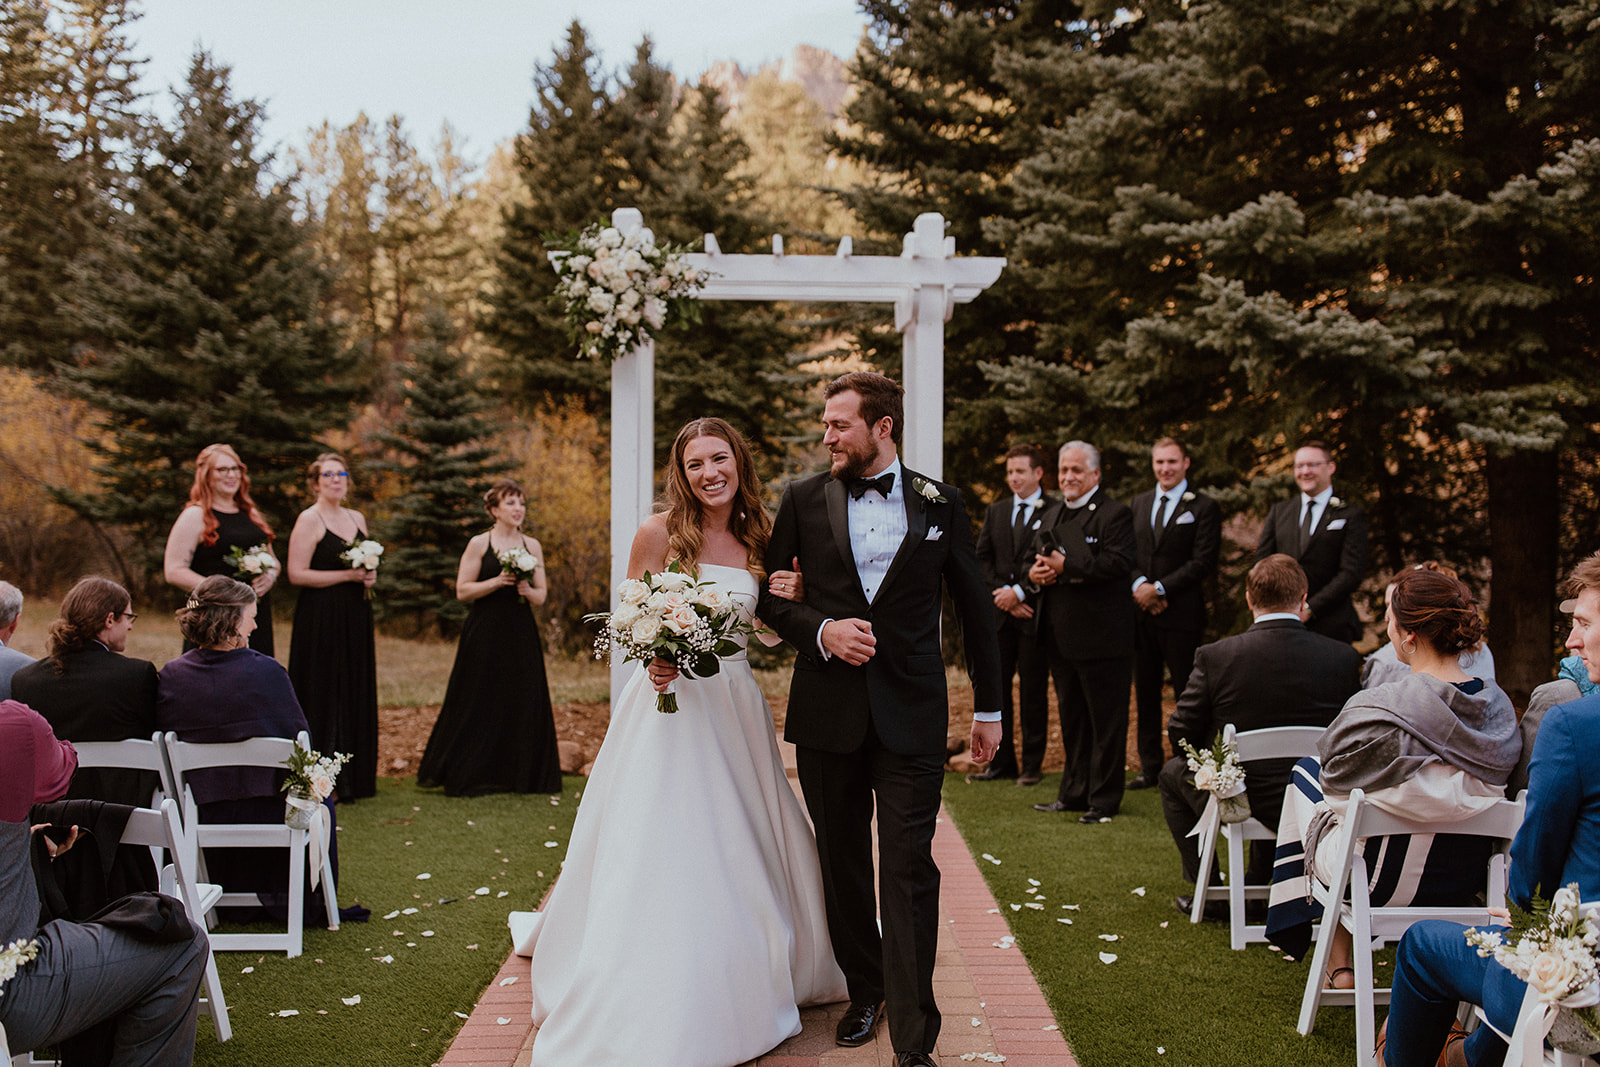 Couple walks down aisle after wedding ceremony in mountains in Colorado